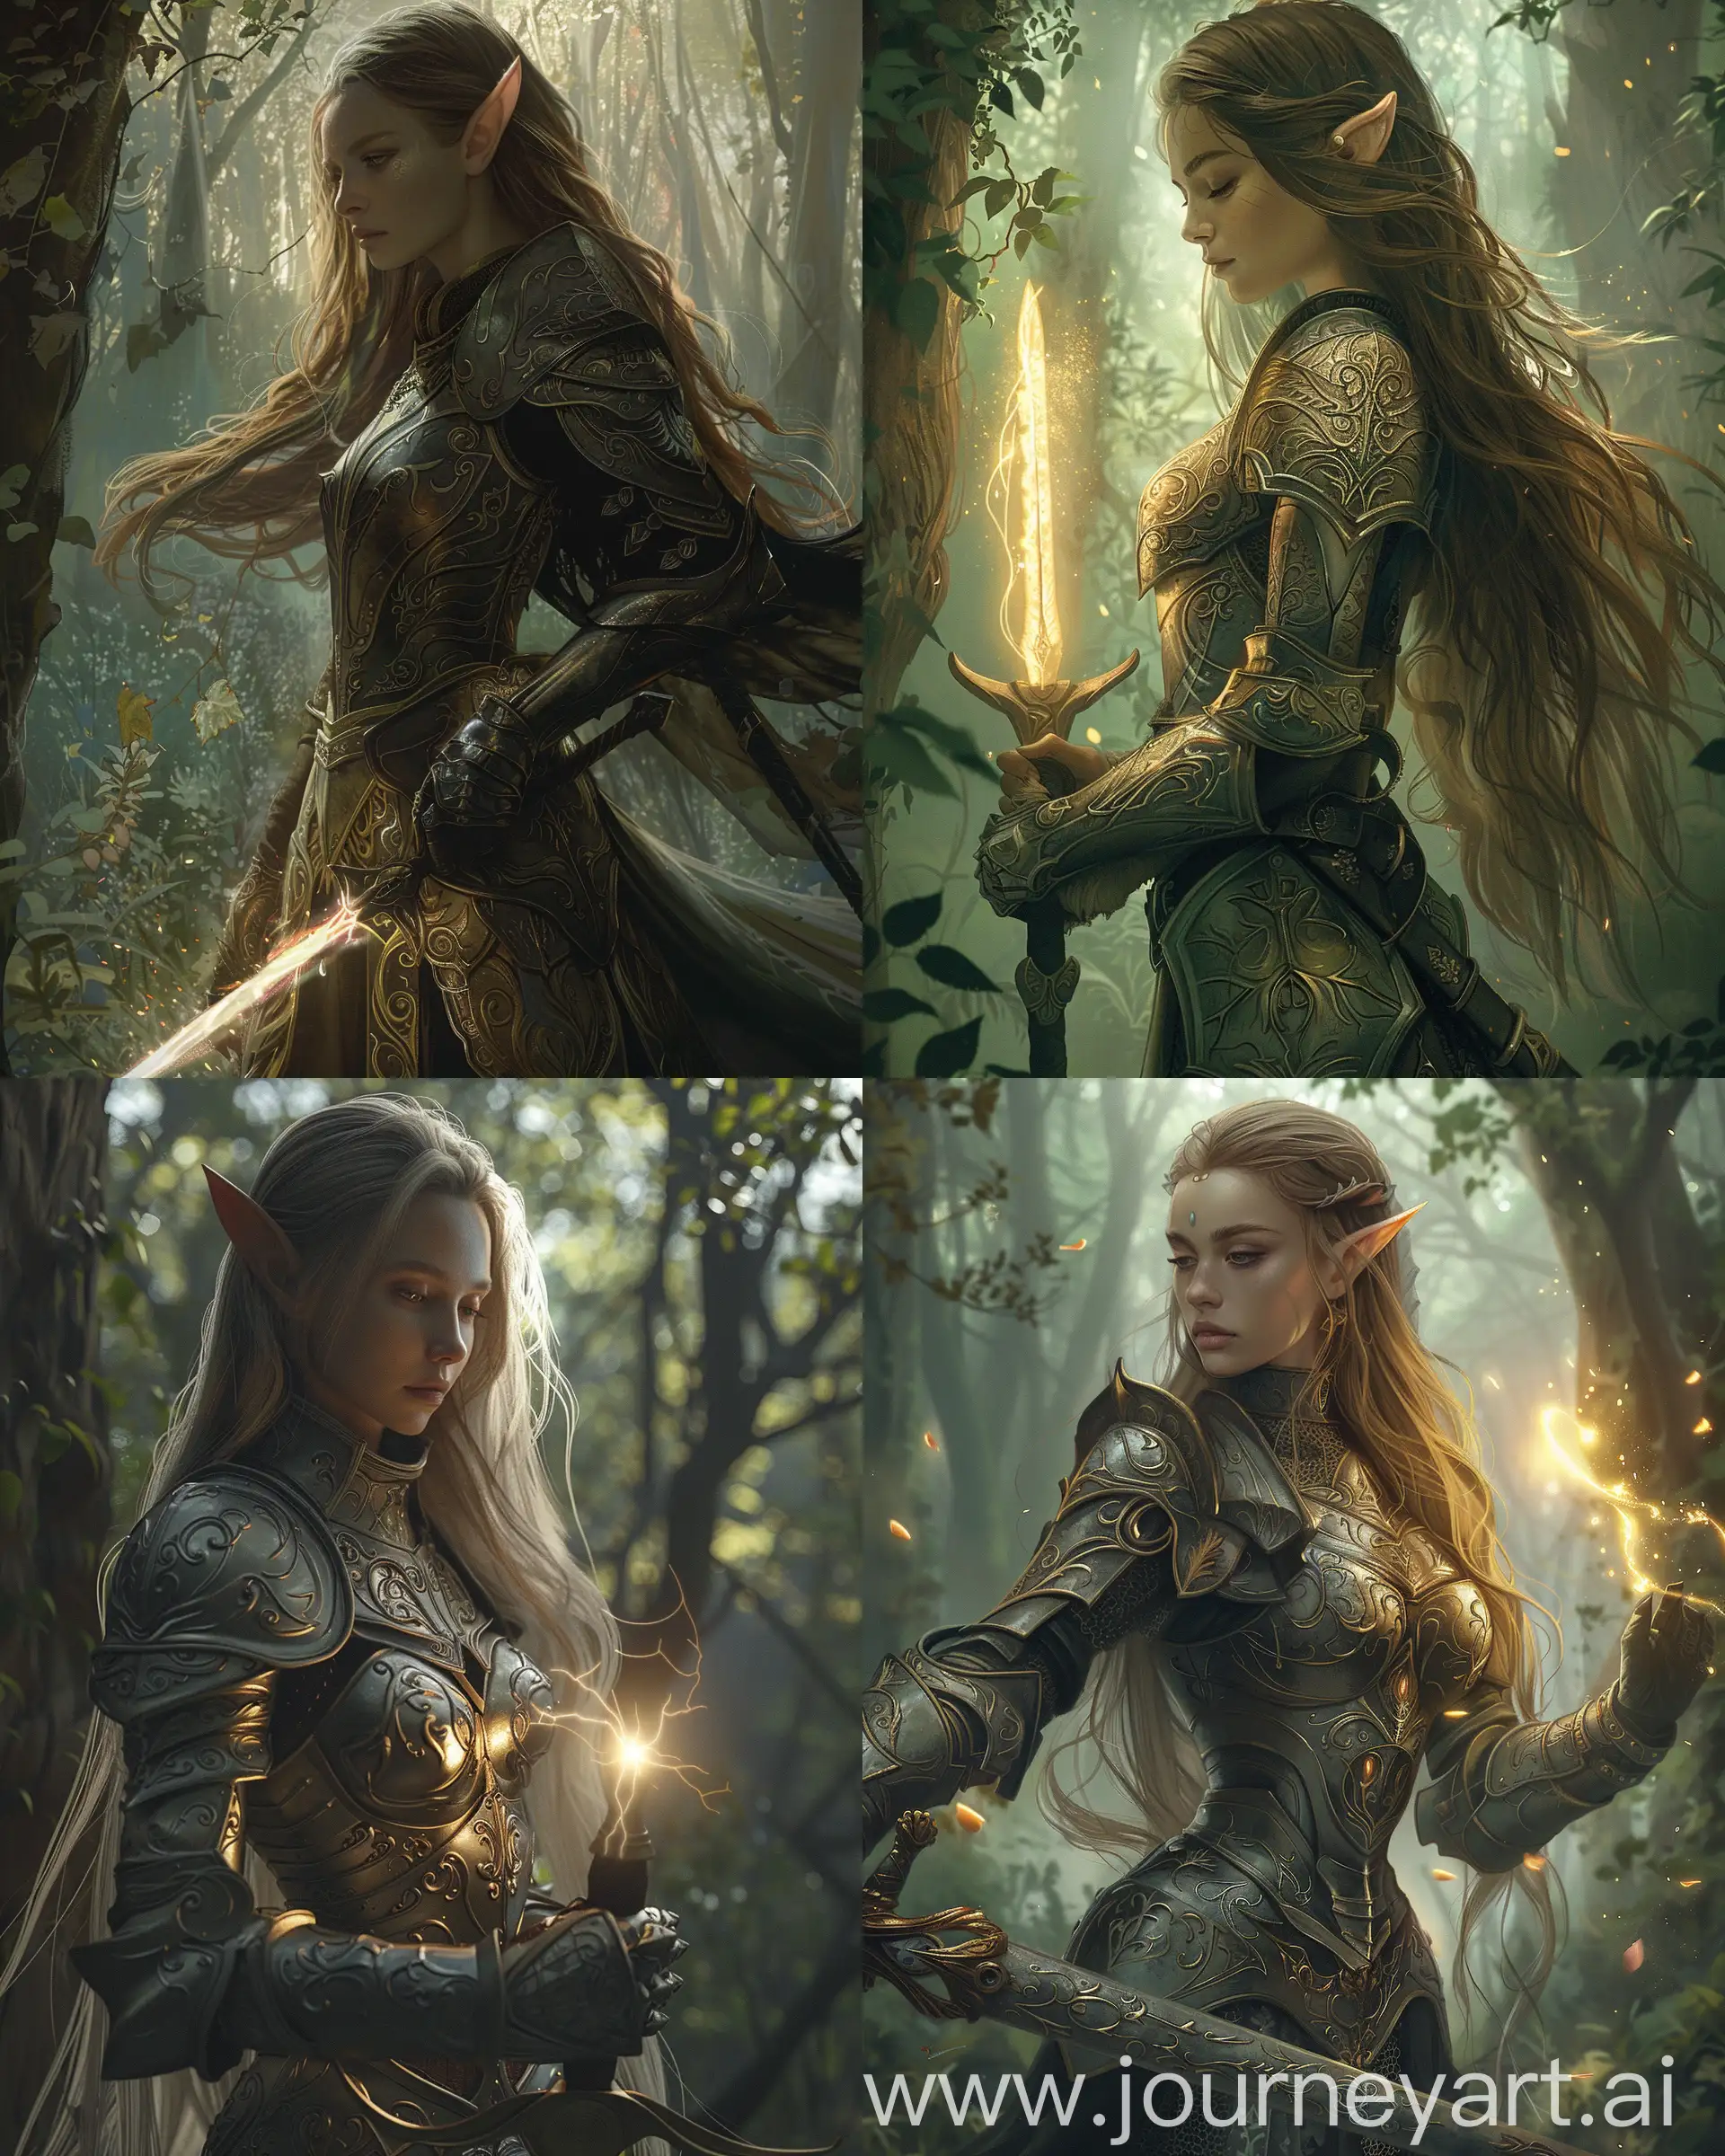 Enchanted-Female-Elf-Knight-in-PreRaphaelite-Style-Armor-Amidst-Mystical-Forest